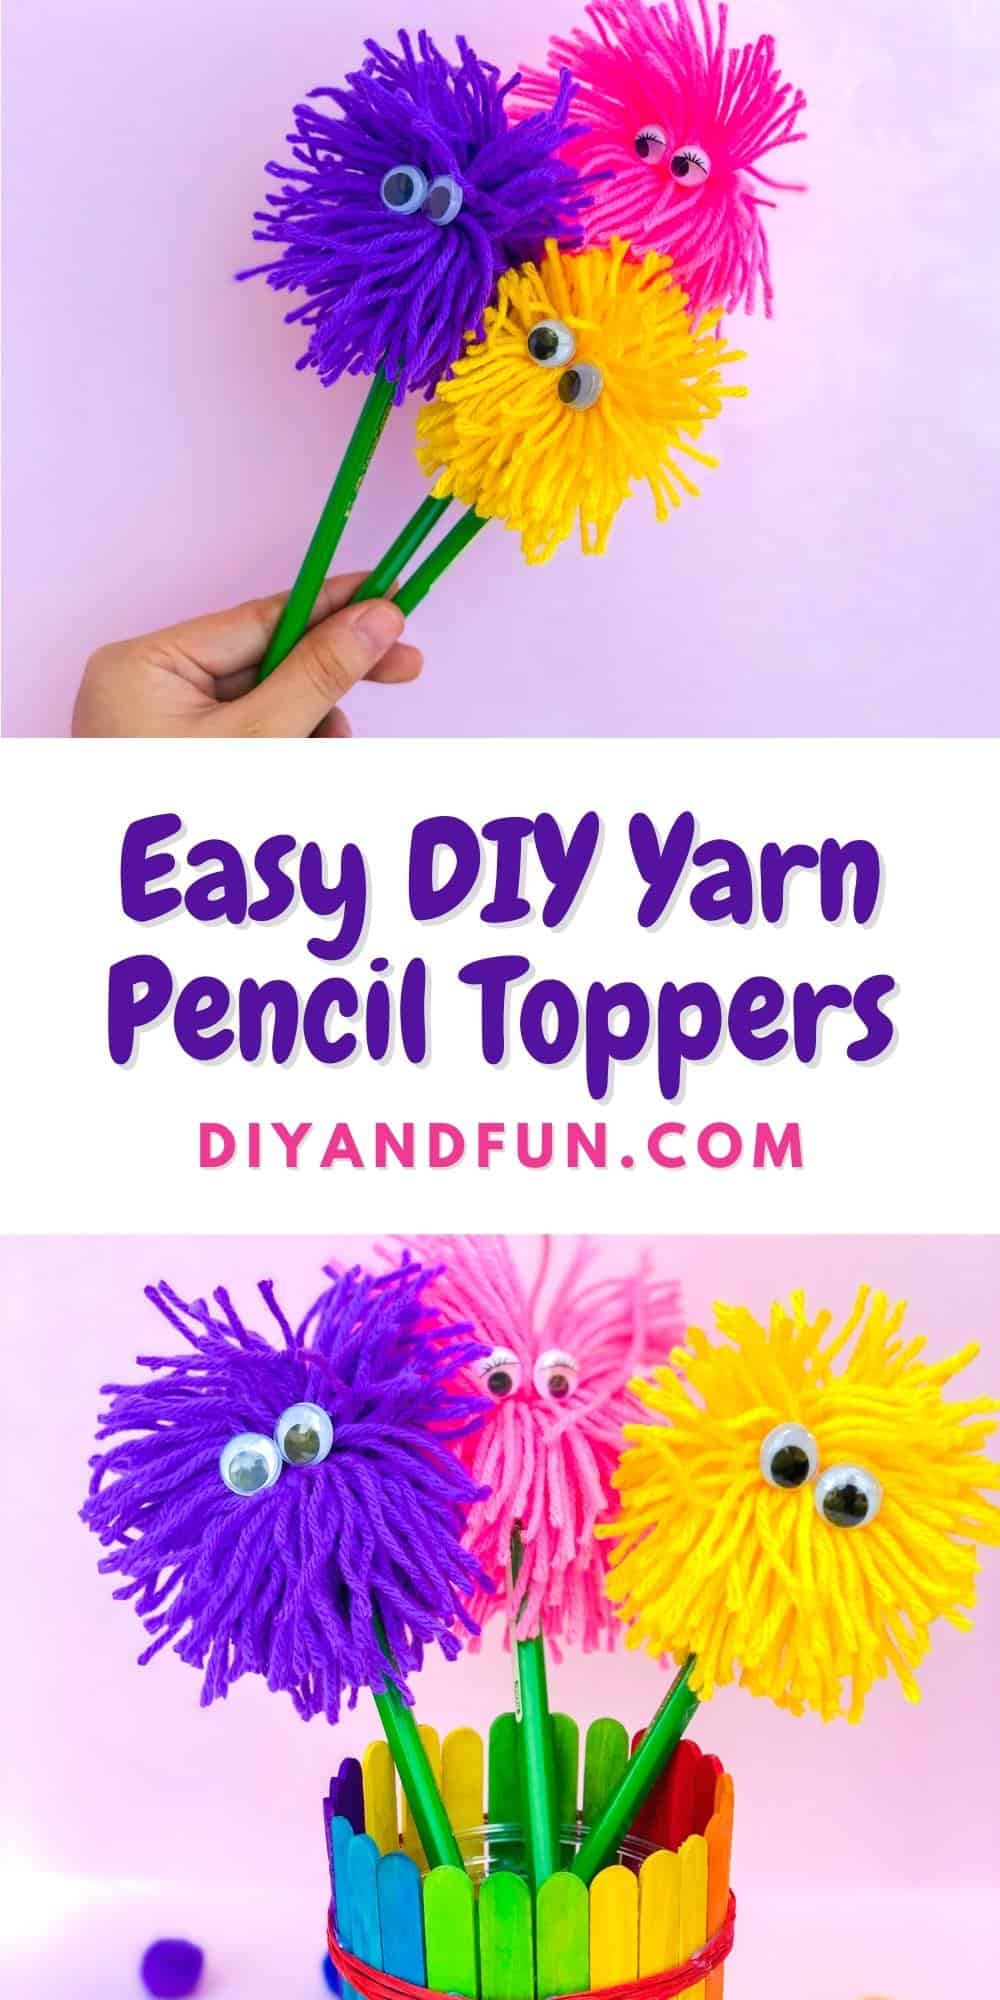 Easy DIY Yarn Pencil Toppers, a simple project for decorating pencils and pens with a homemade craft pom pom. Most ages.